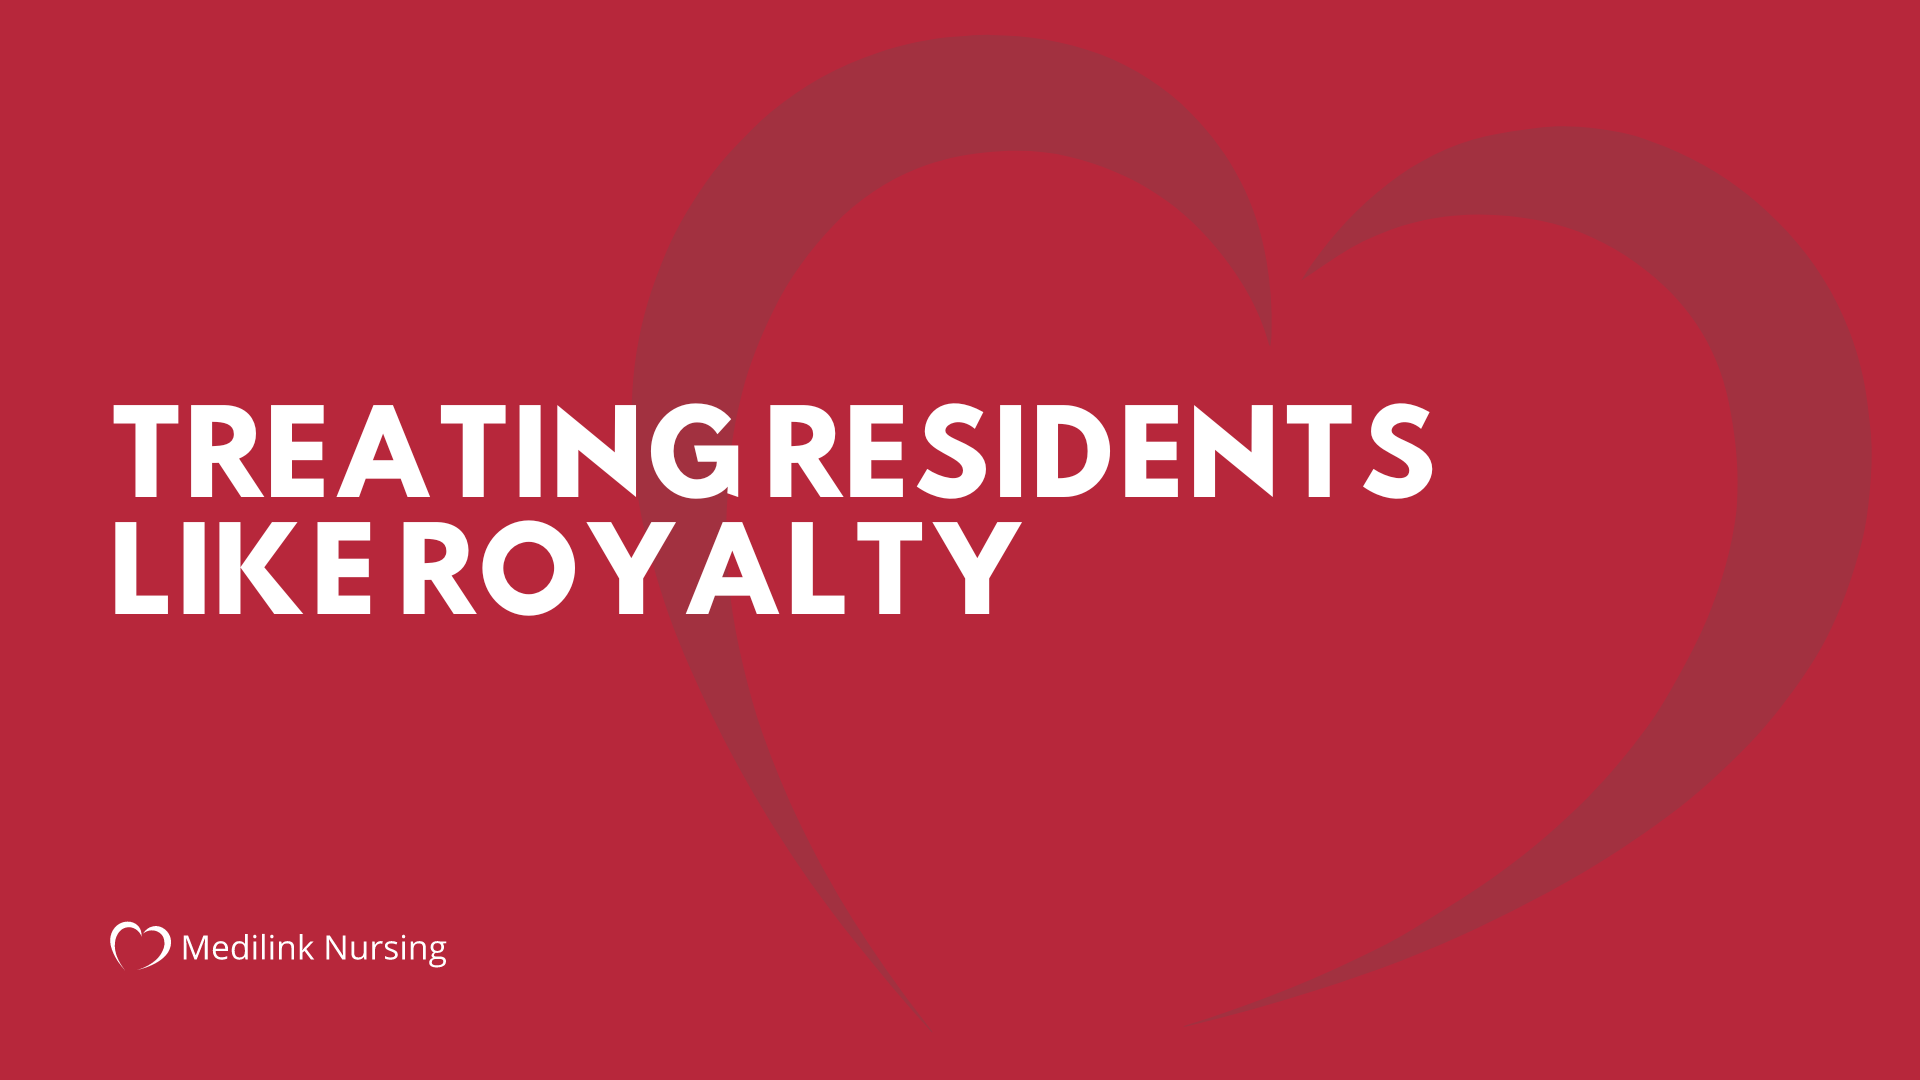 Treating Residents like Royalty: Medilink Nursing provides High-Quality Care in Care Homes